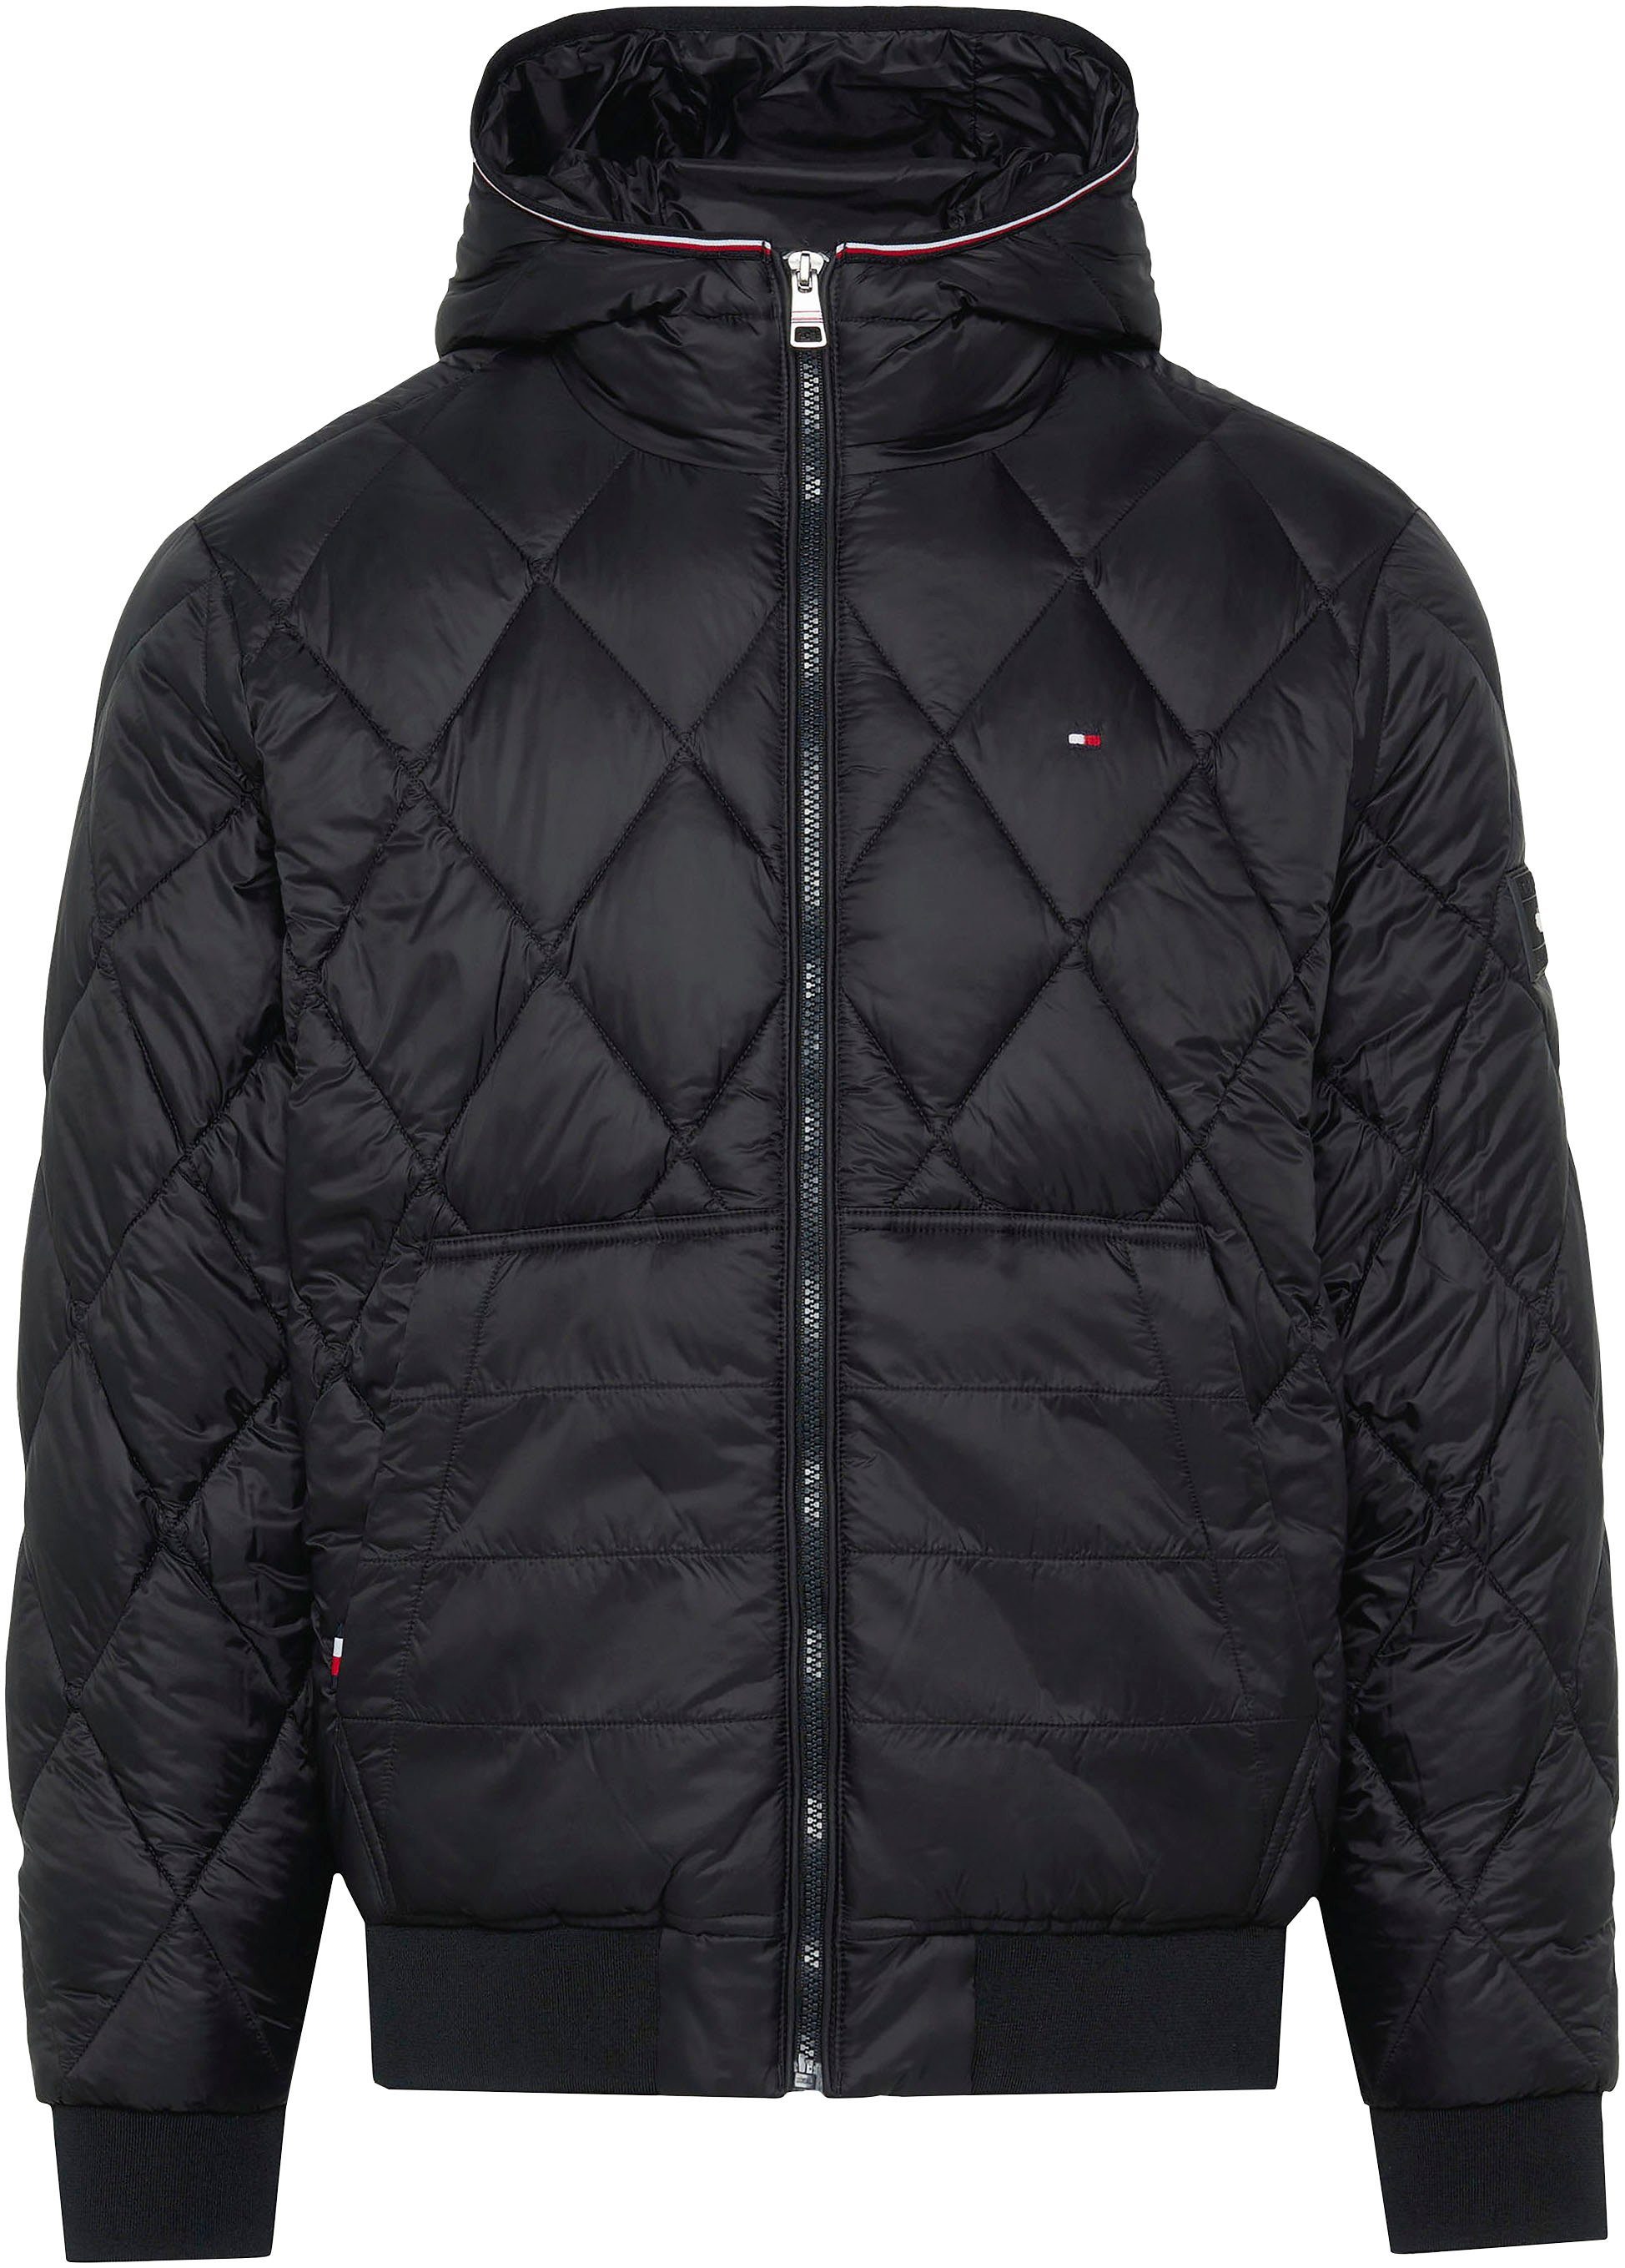 Steppjacke Tommy RECYCLED Black Hilfiger QUILT MIX